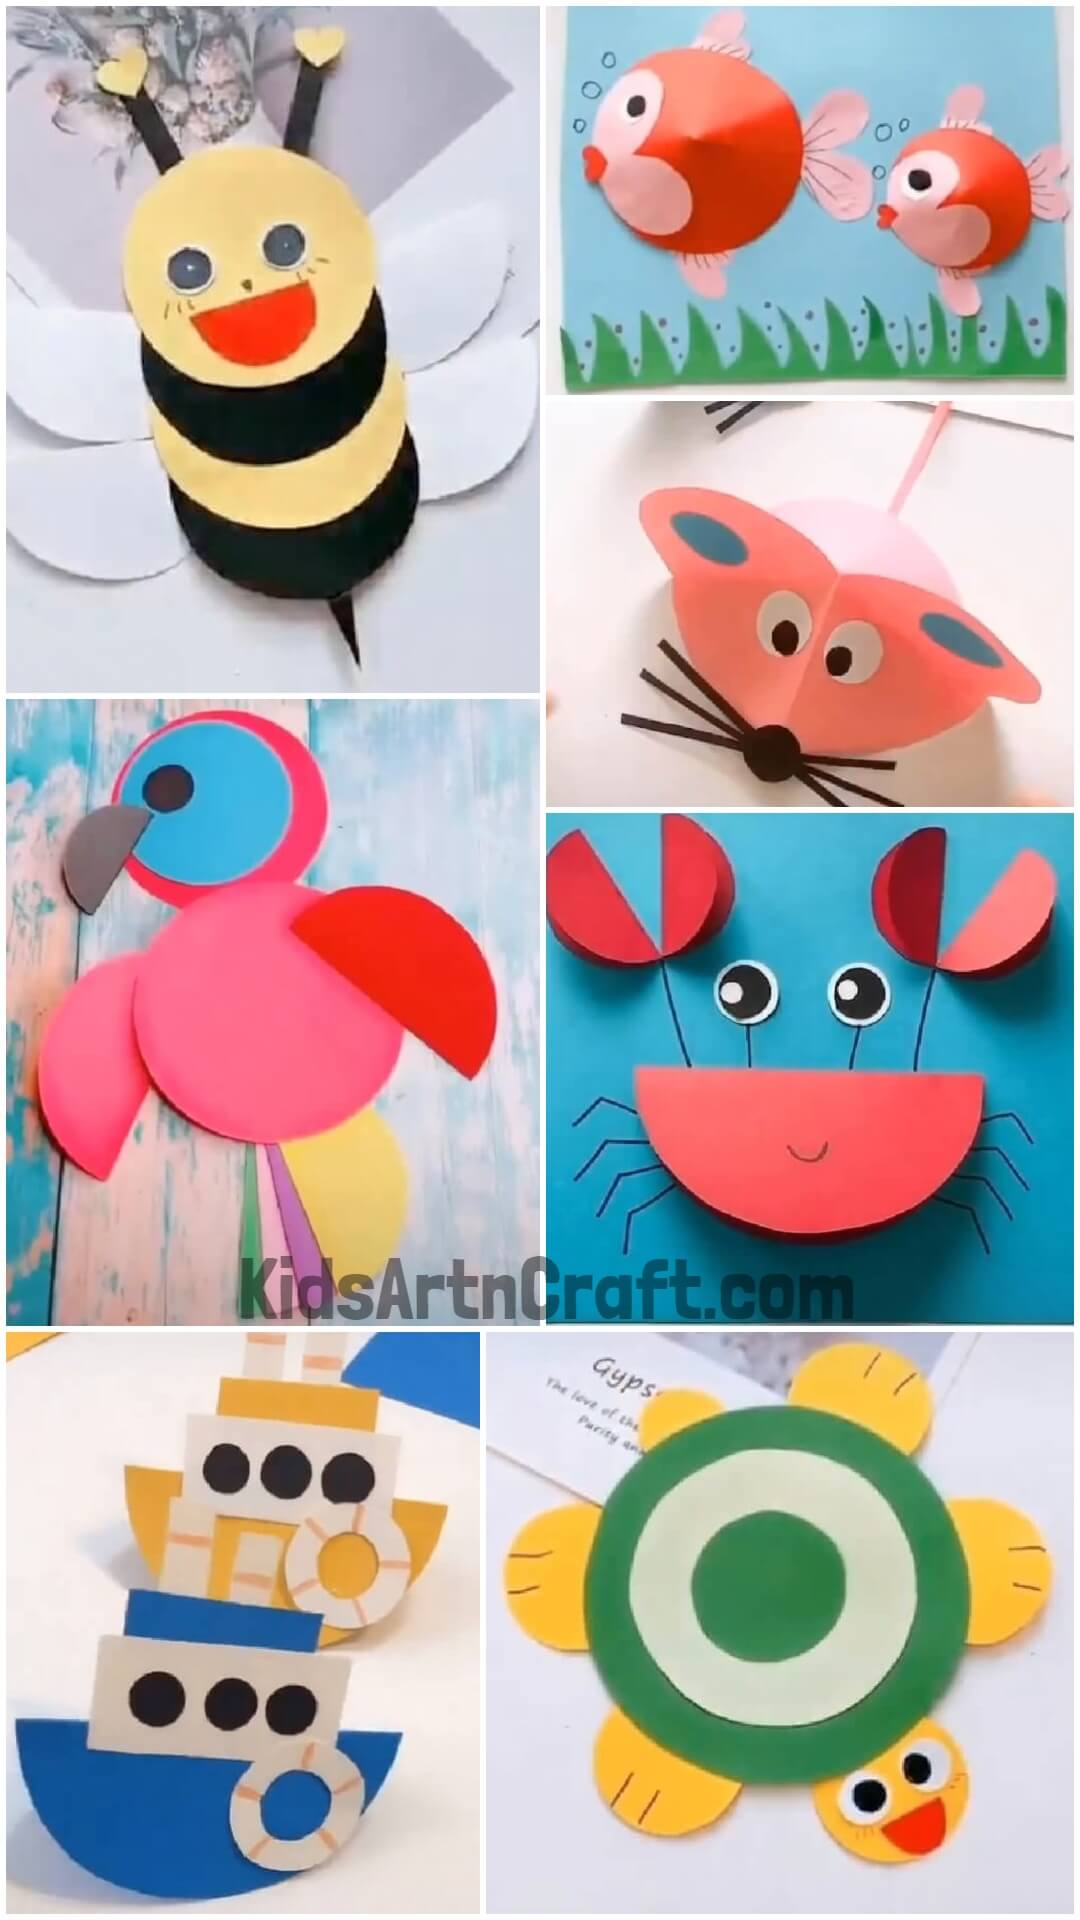 Simple Appealing Paper Craft Ideas For Next DIY Greeting Card